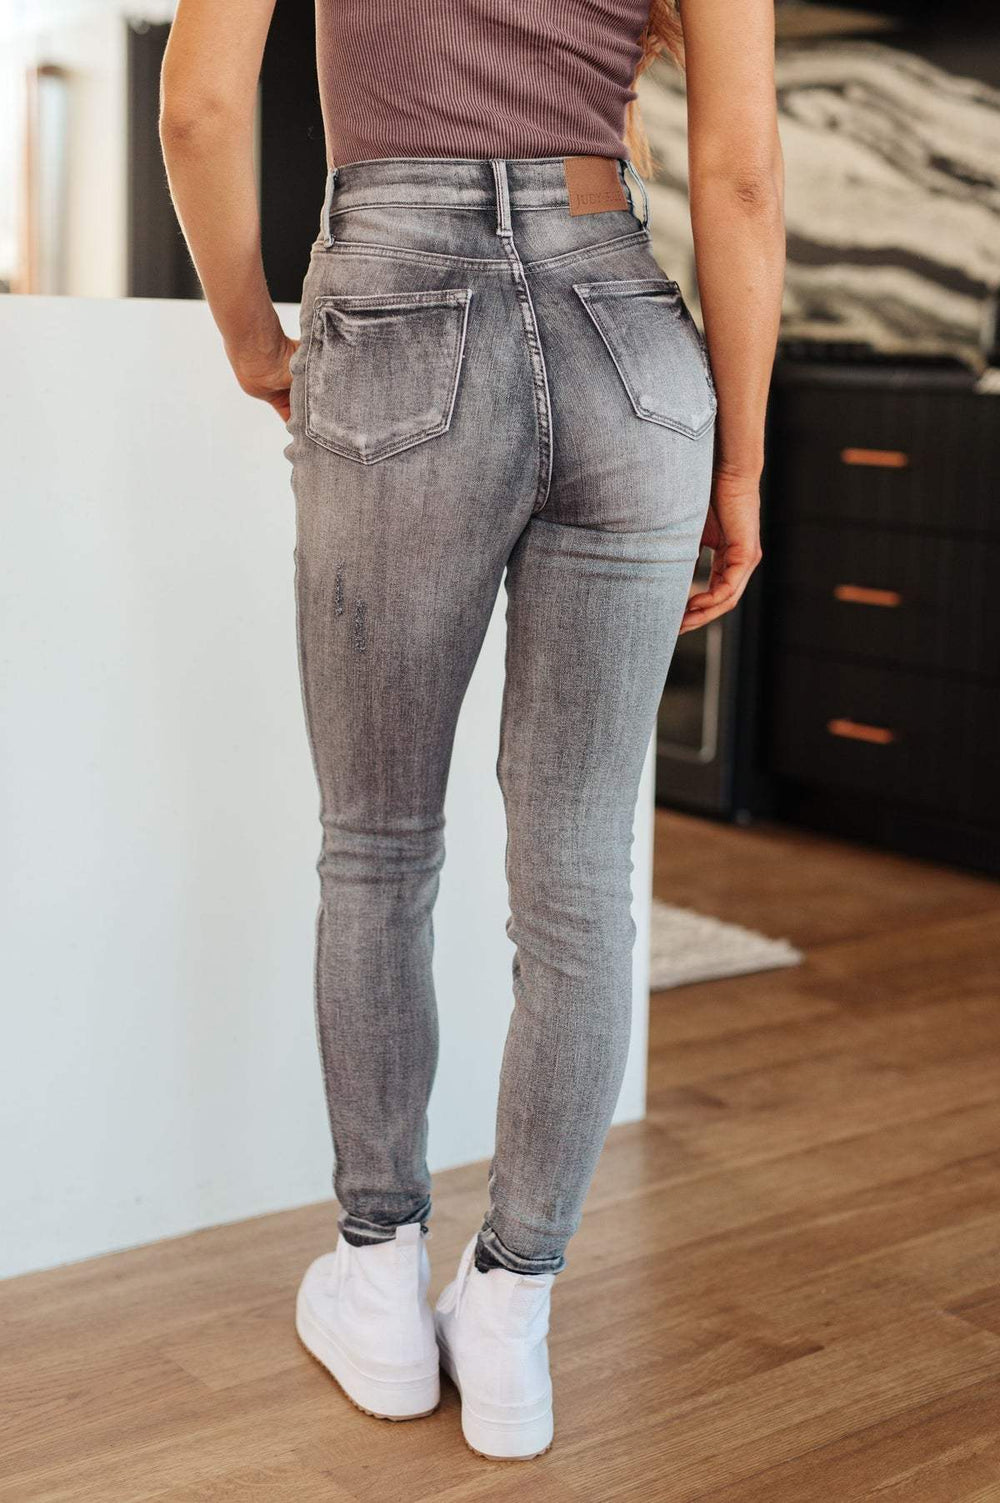 Judy Blue Skinny Jeans - High Rise - Control Top - Released Hem - Inspired Eye Boutique